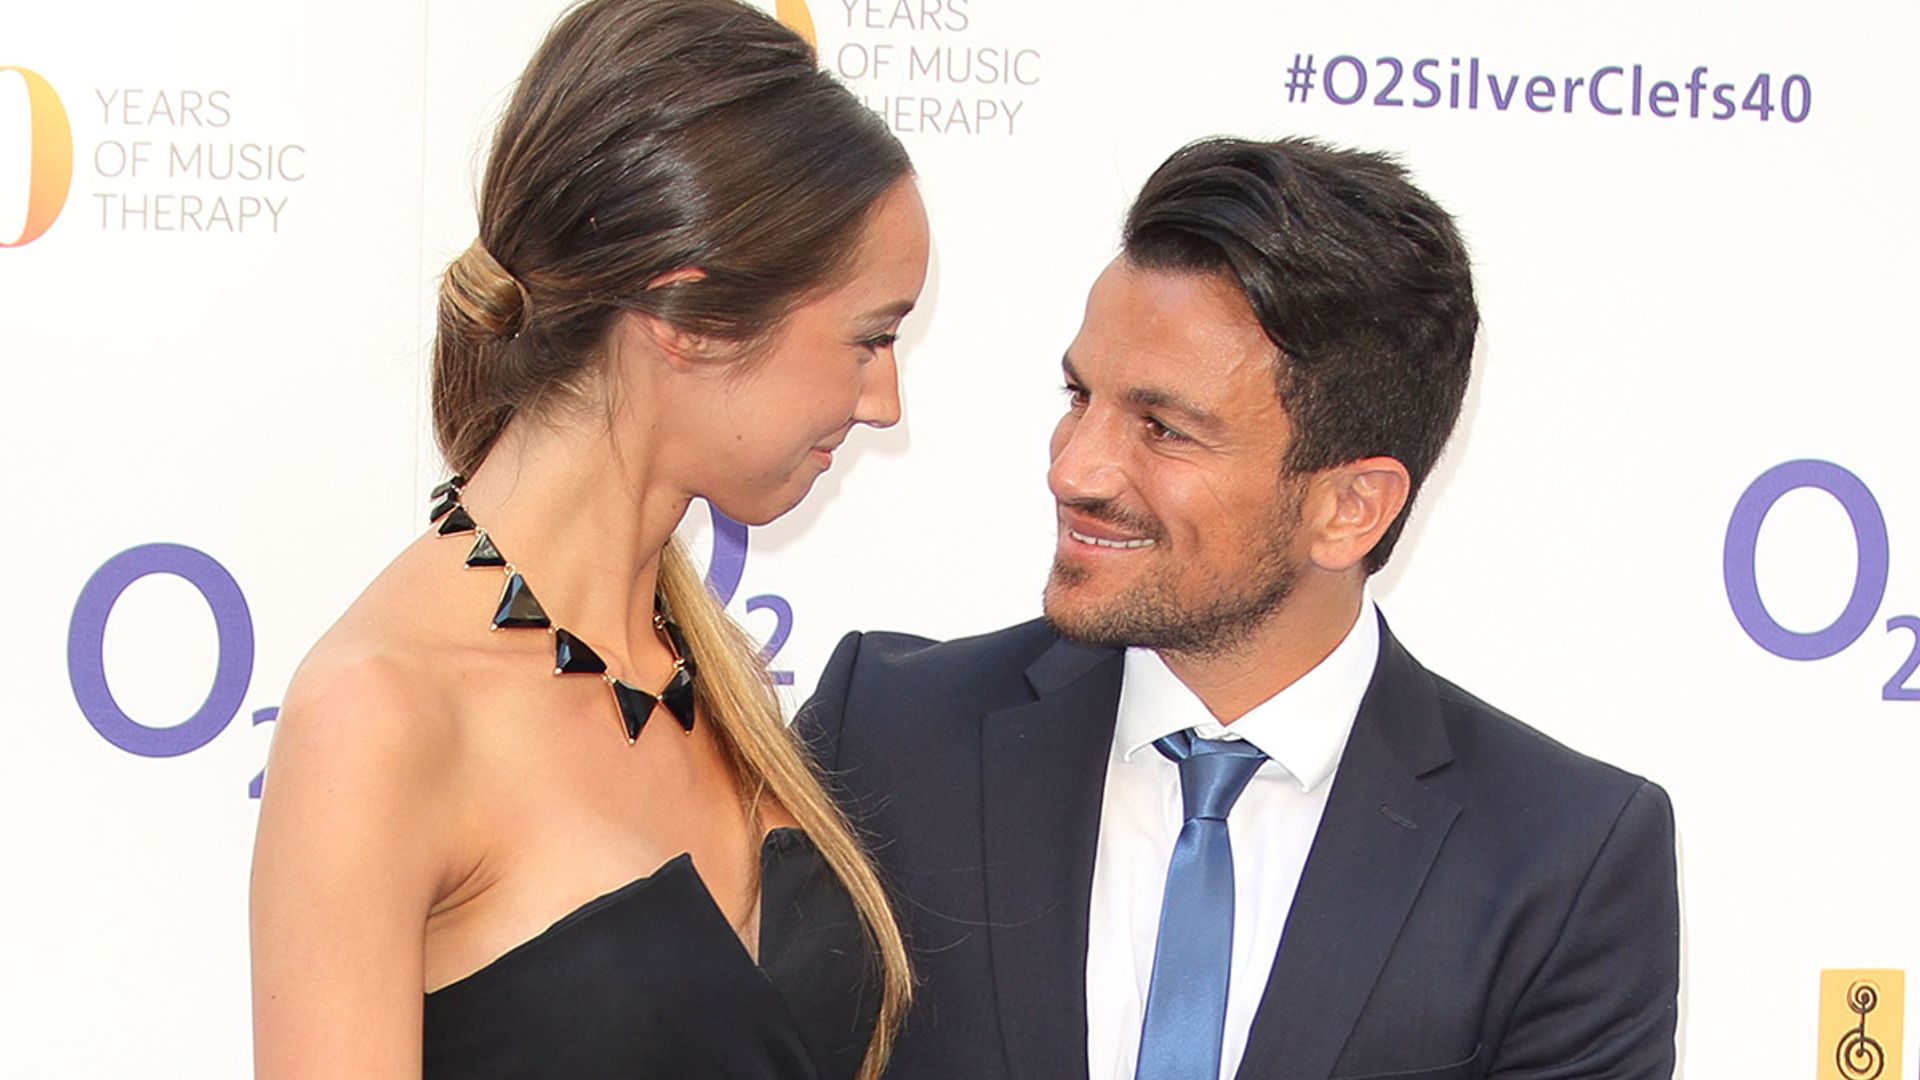 Peter Andre reveals his pride at wife Emily during coronavirus pandemic